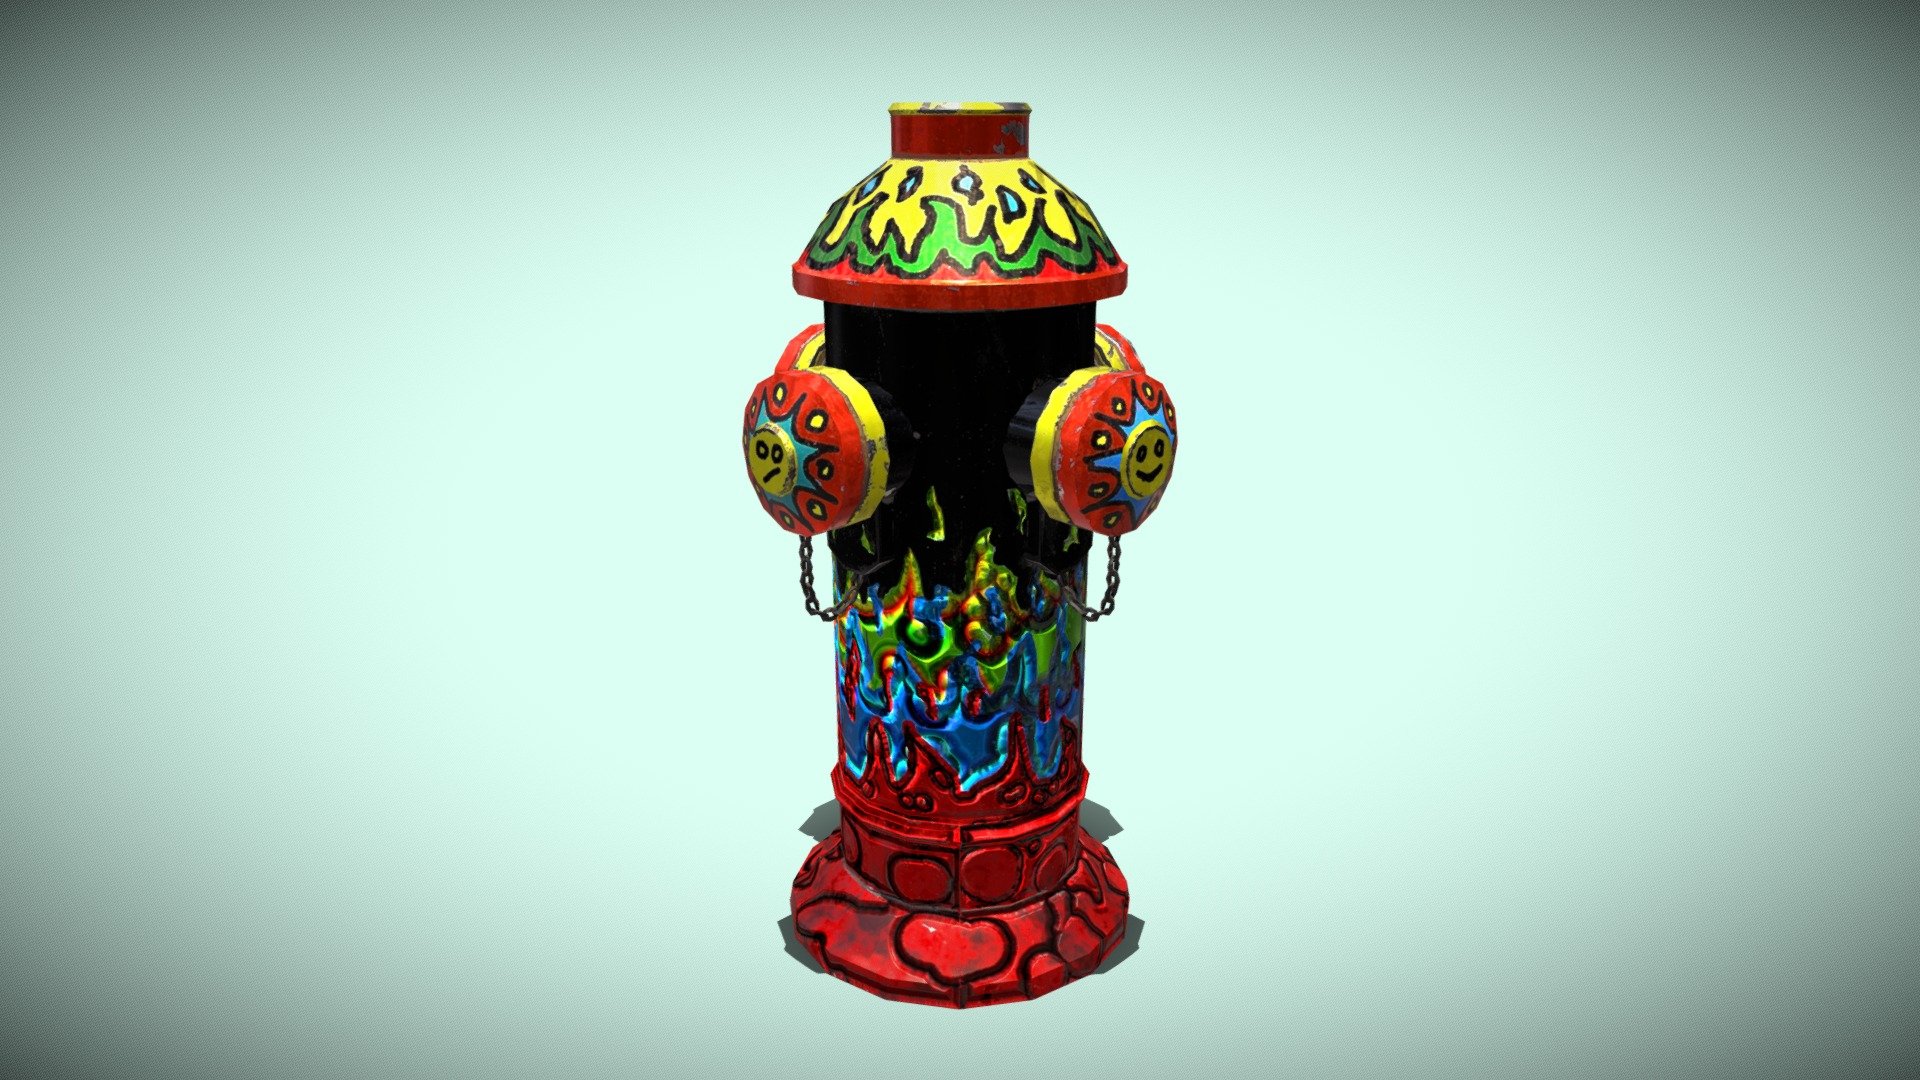 Fire hydrant painted by hand, hippie style and graffiti genre. Good template to use in games and art design etc&hellip; In additional download .dae .fbx .obj 3d model